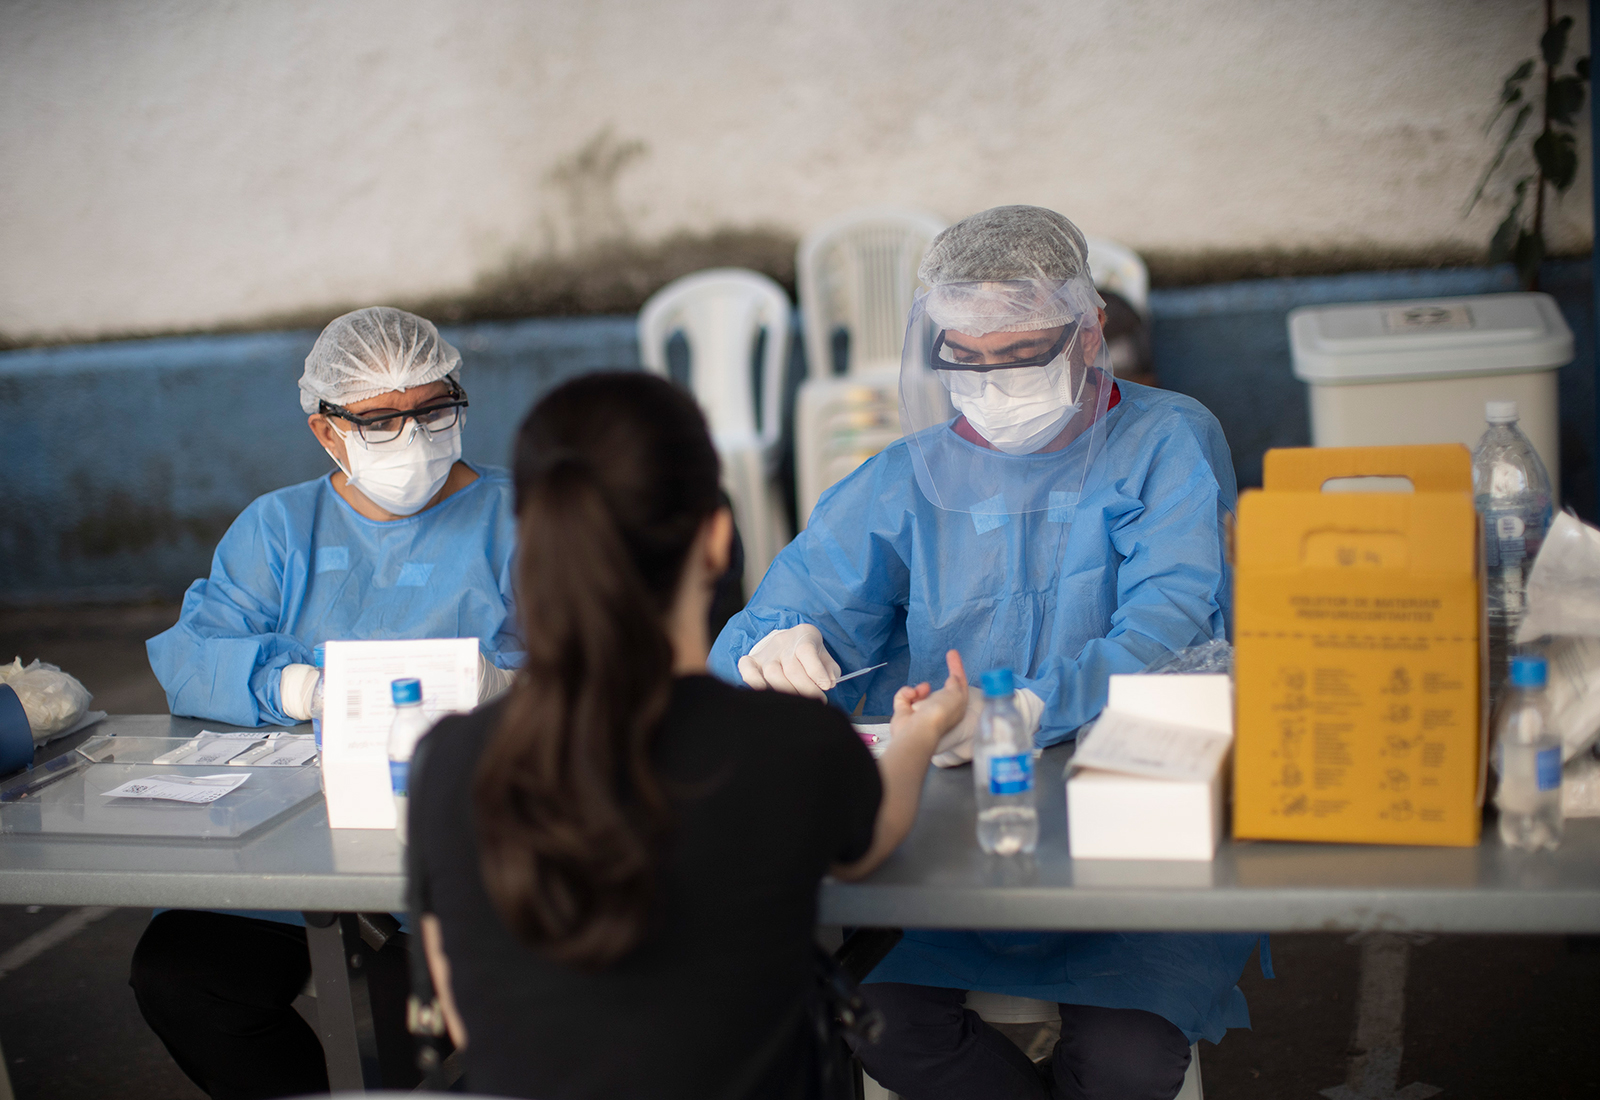 Health workers take residents' blood samples at a testing site for Covid-19 in Rio de Janeiro, Brazil, on Friday, July 17. 